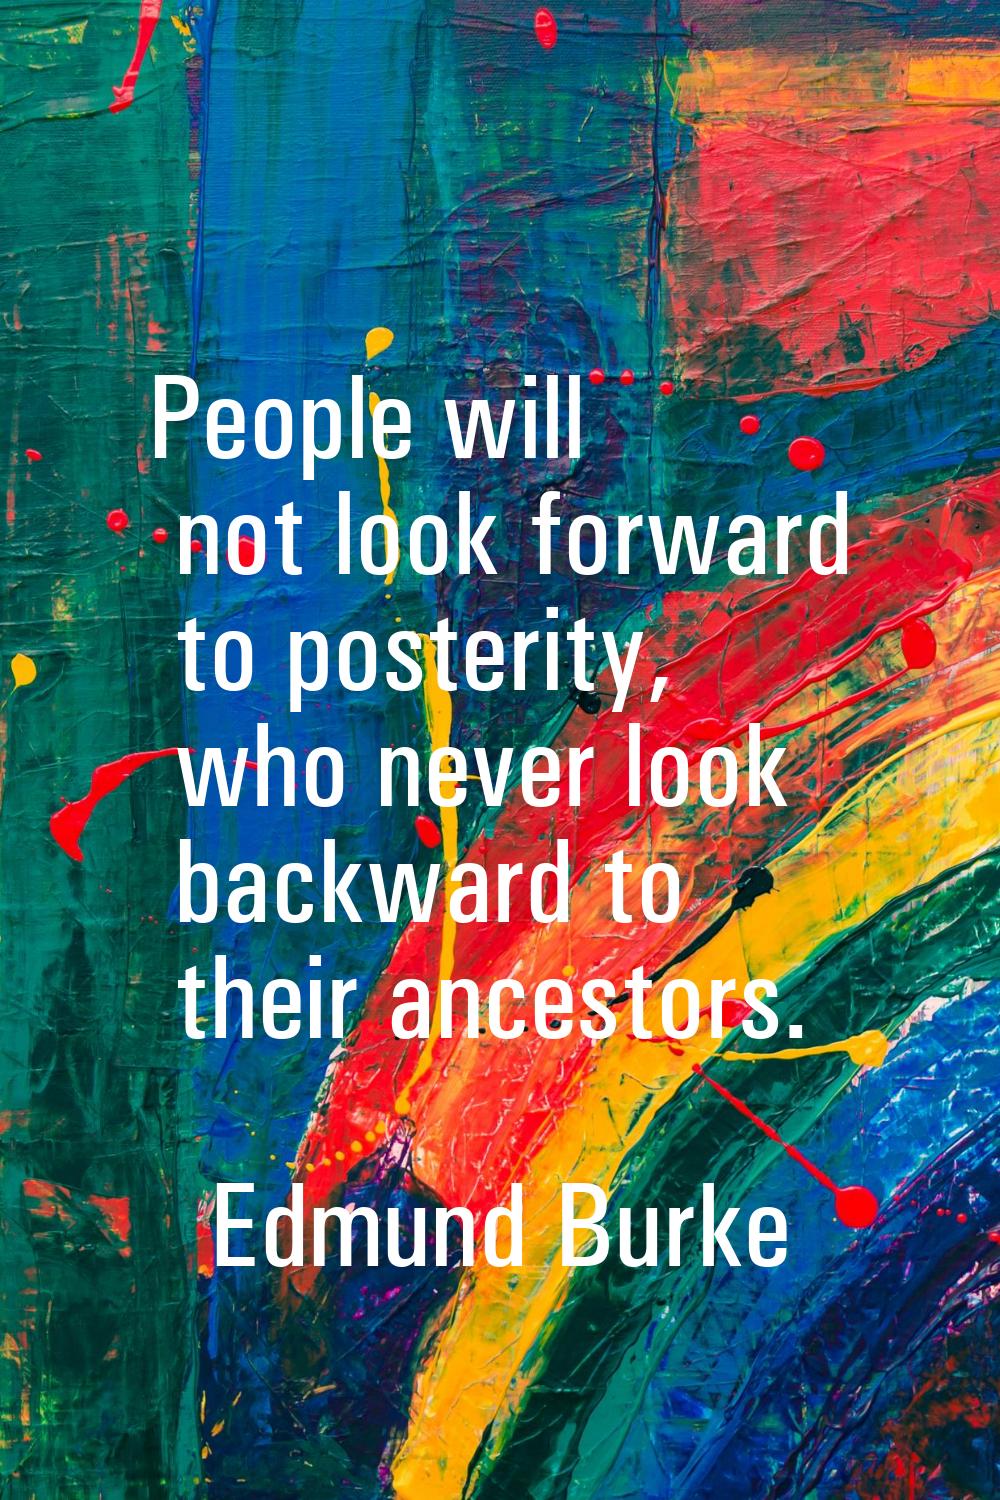 People will not look forward to posterity, who never look backward to their ancestors.